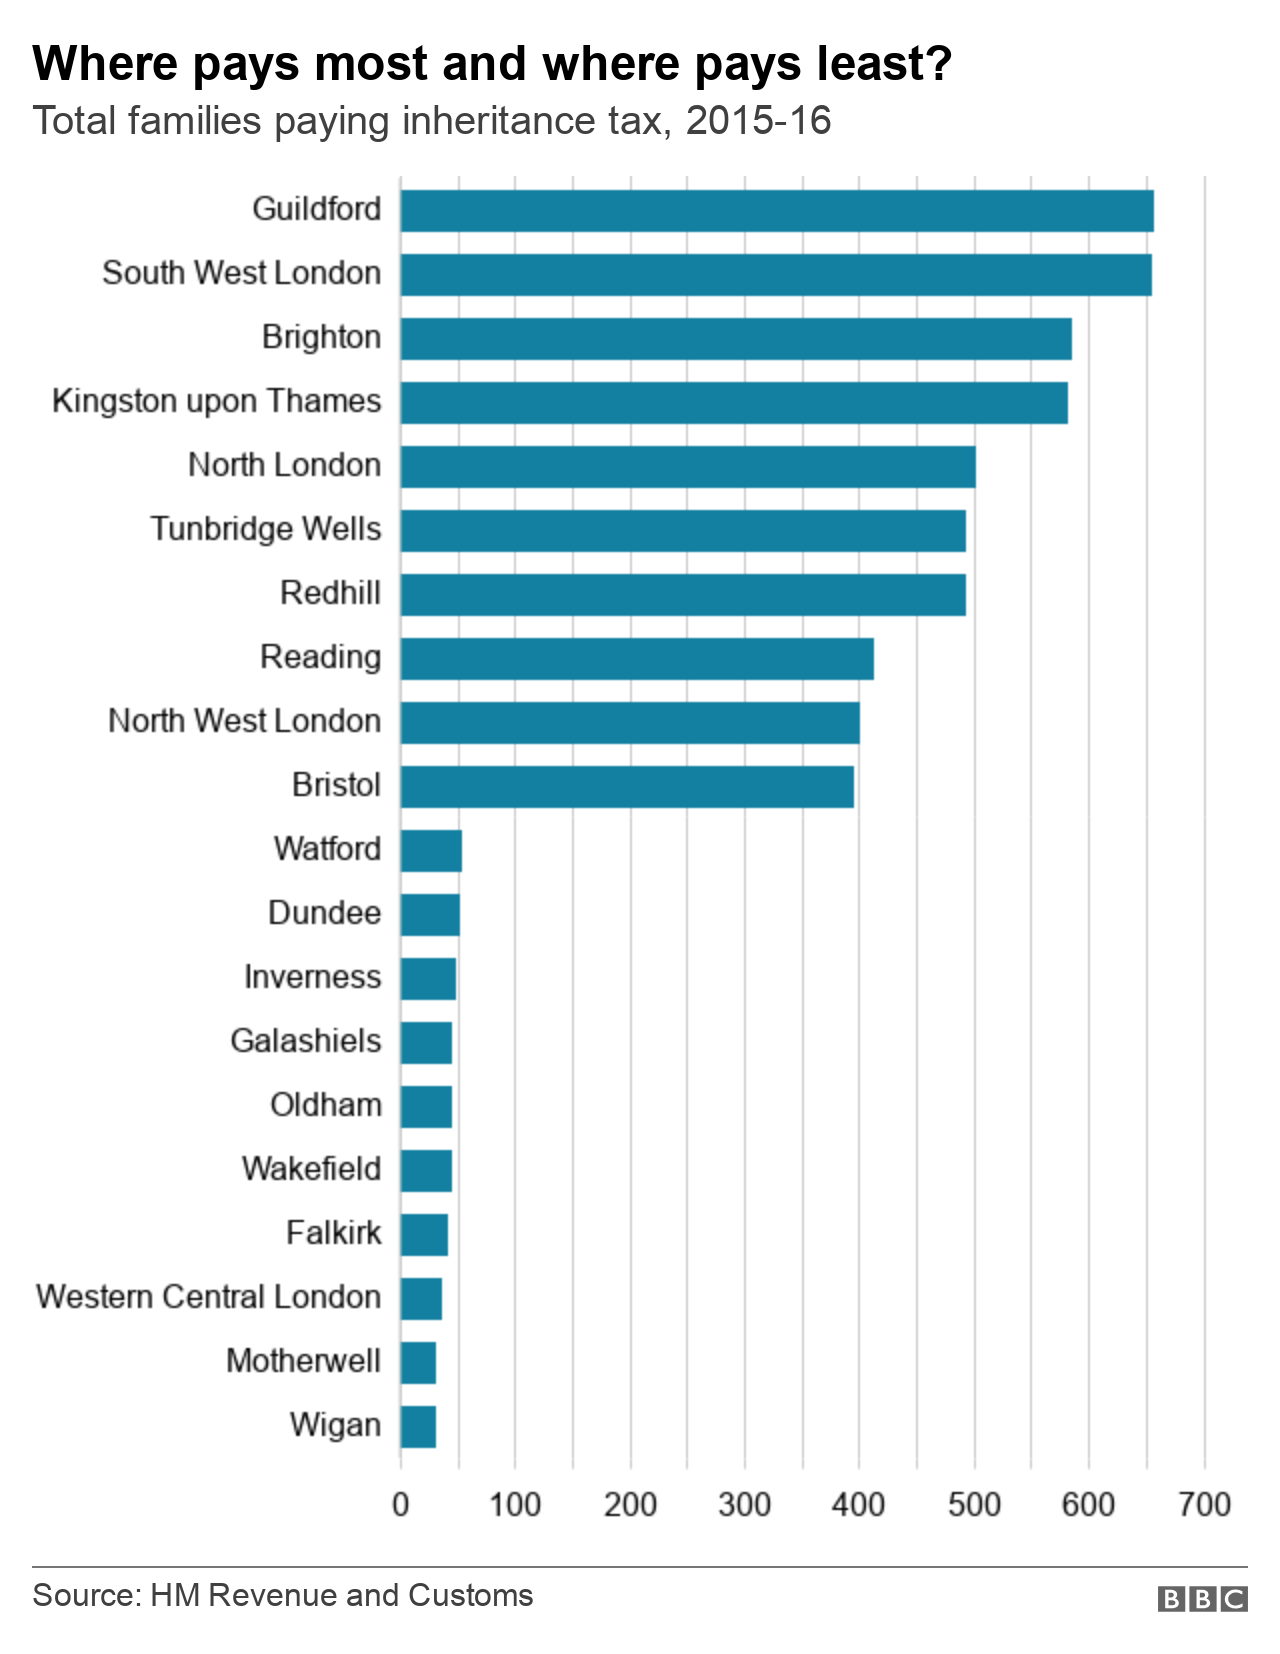 Guildford is the inheritance tax 'capital' of the UK BBC News